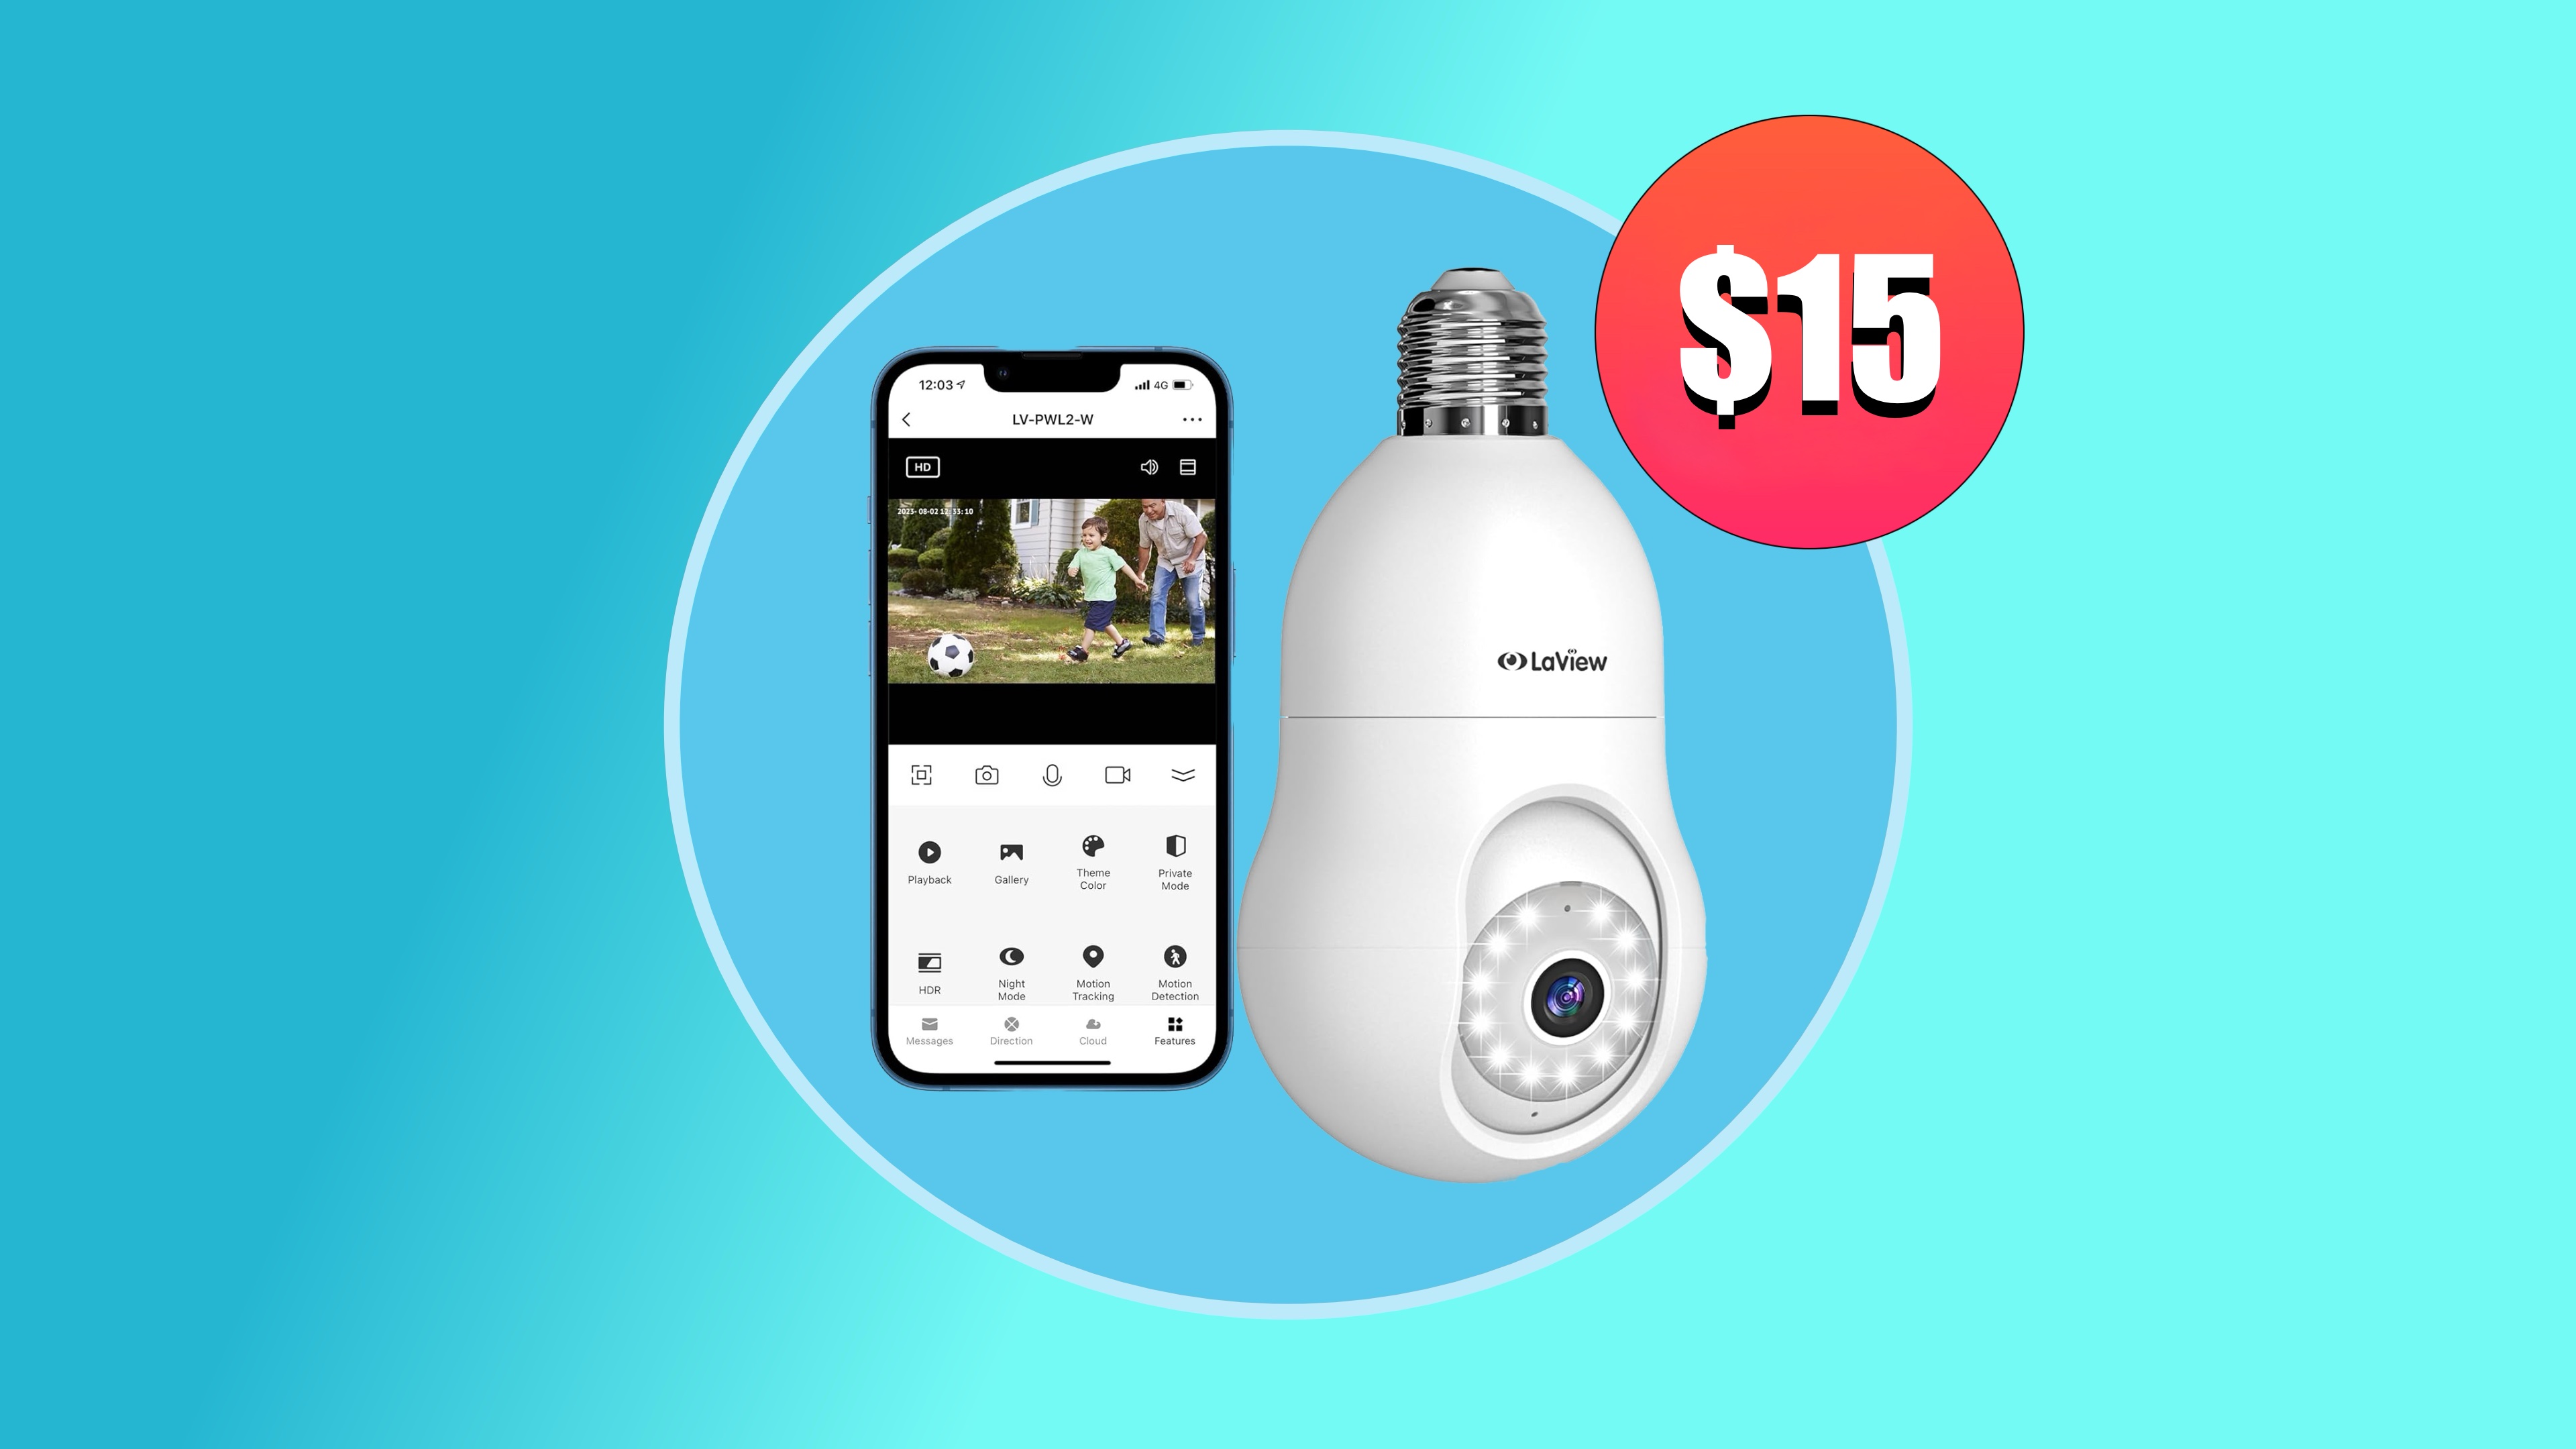 This clever smart bulb 2K security camera is on sale for just $15